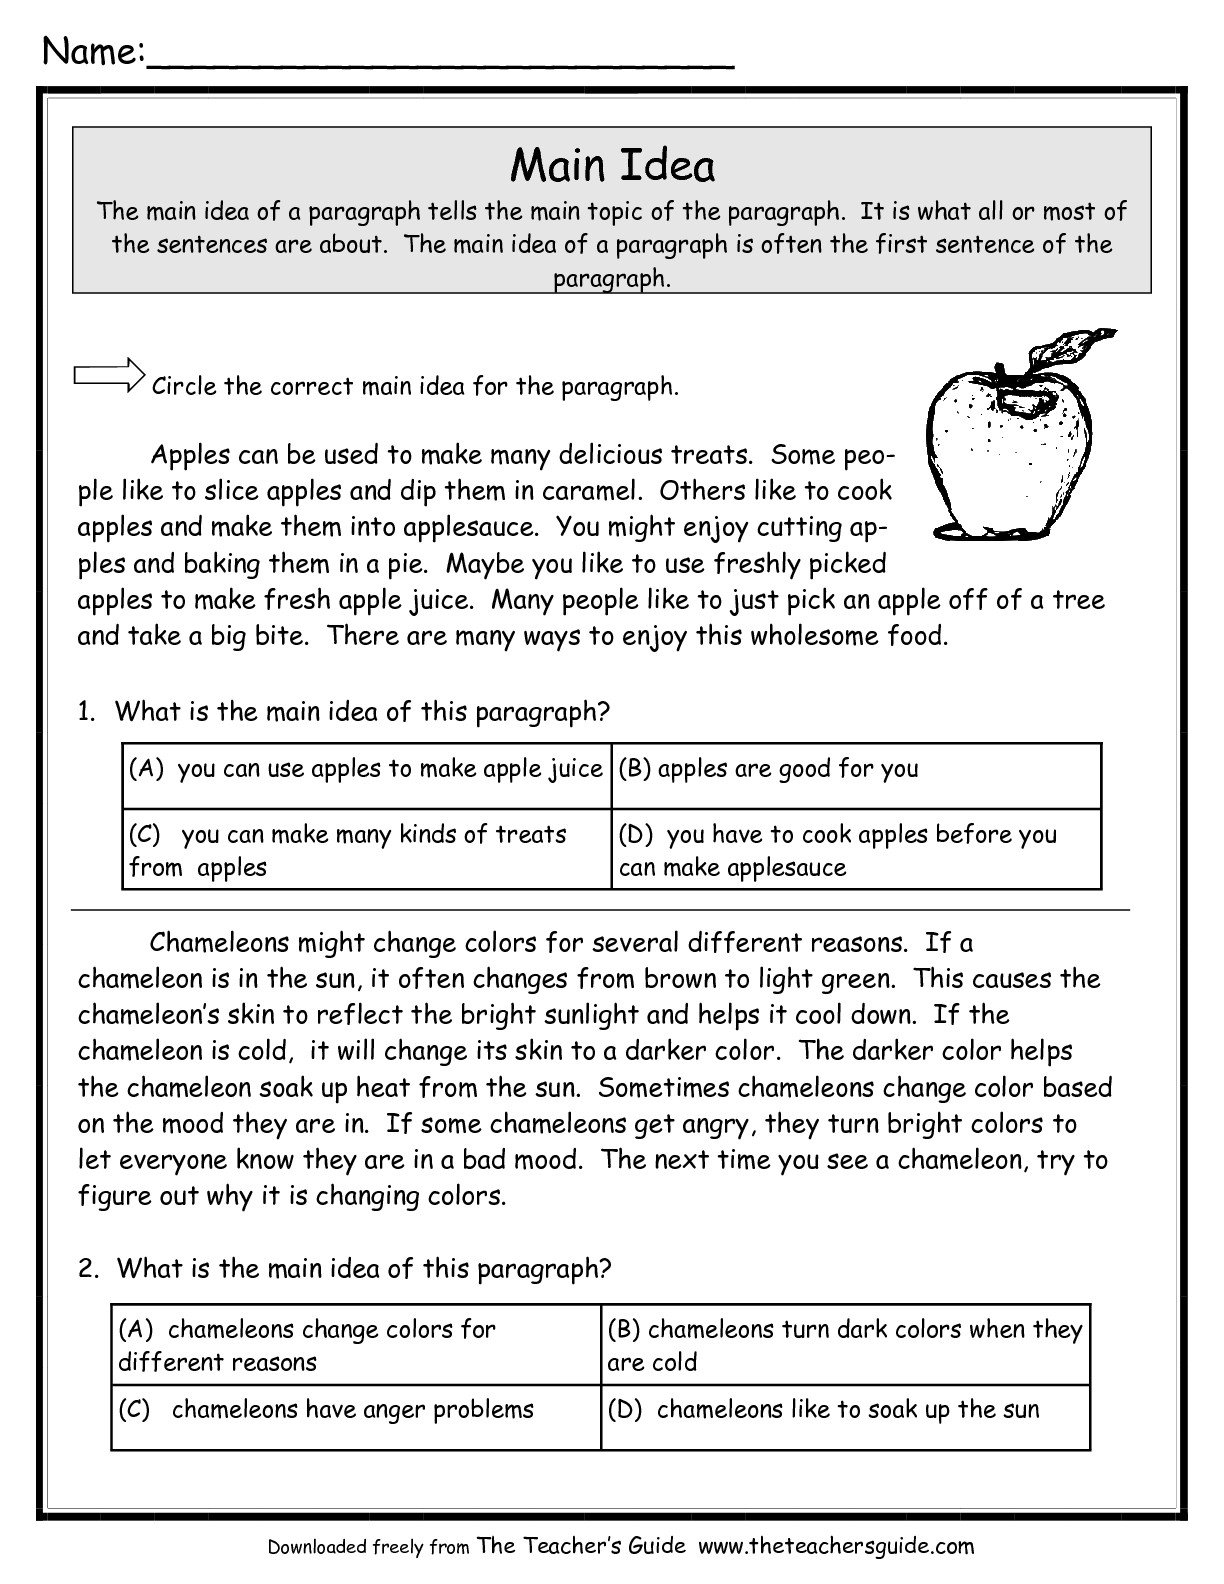 Main Idea Worksheets From The Teacher's Guide Along With Main Idea Worksheets